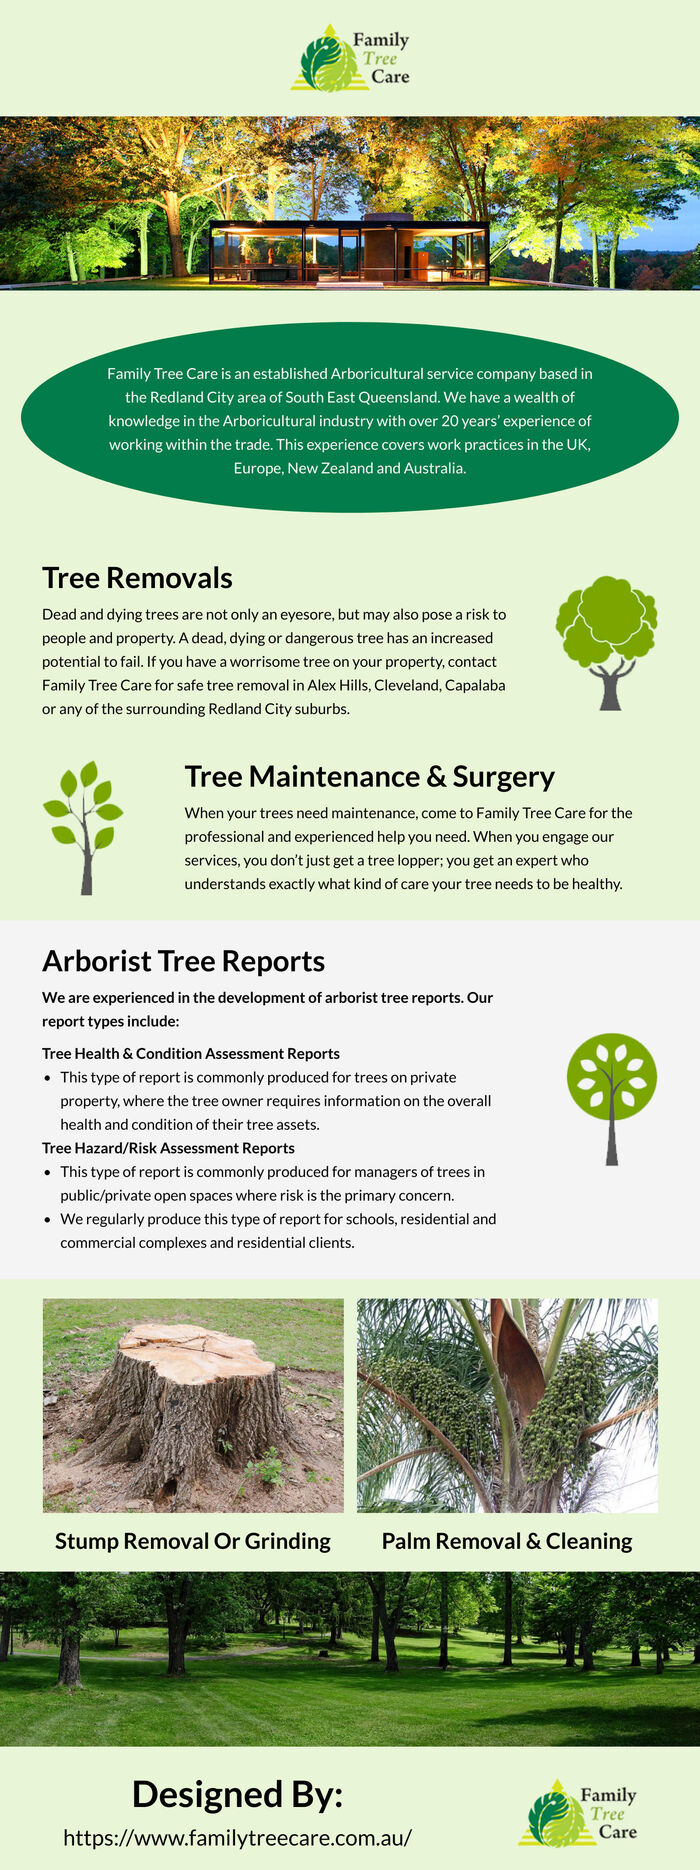 This infographic is designed by Family Tree Care